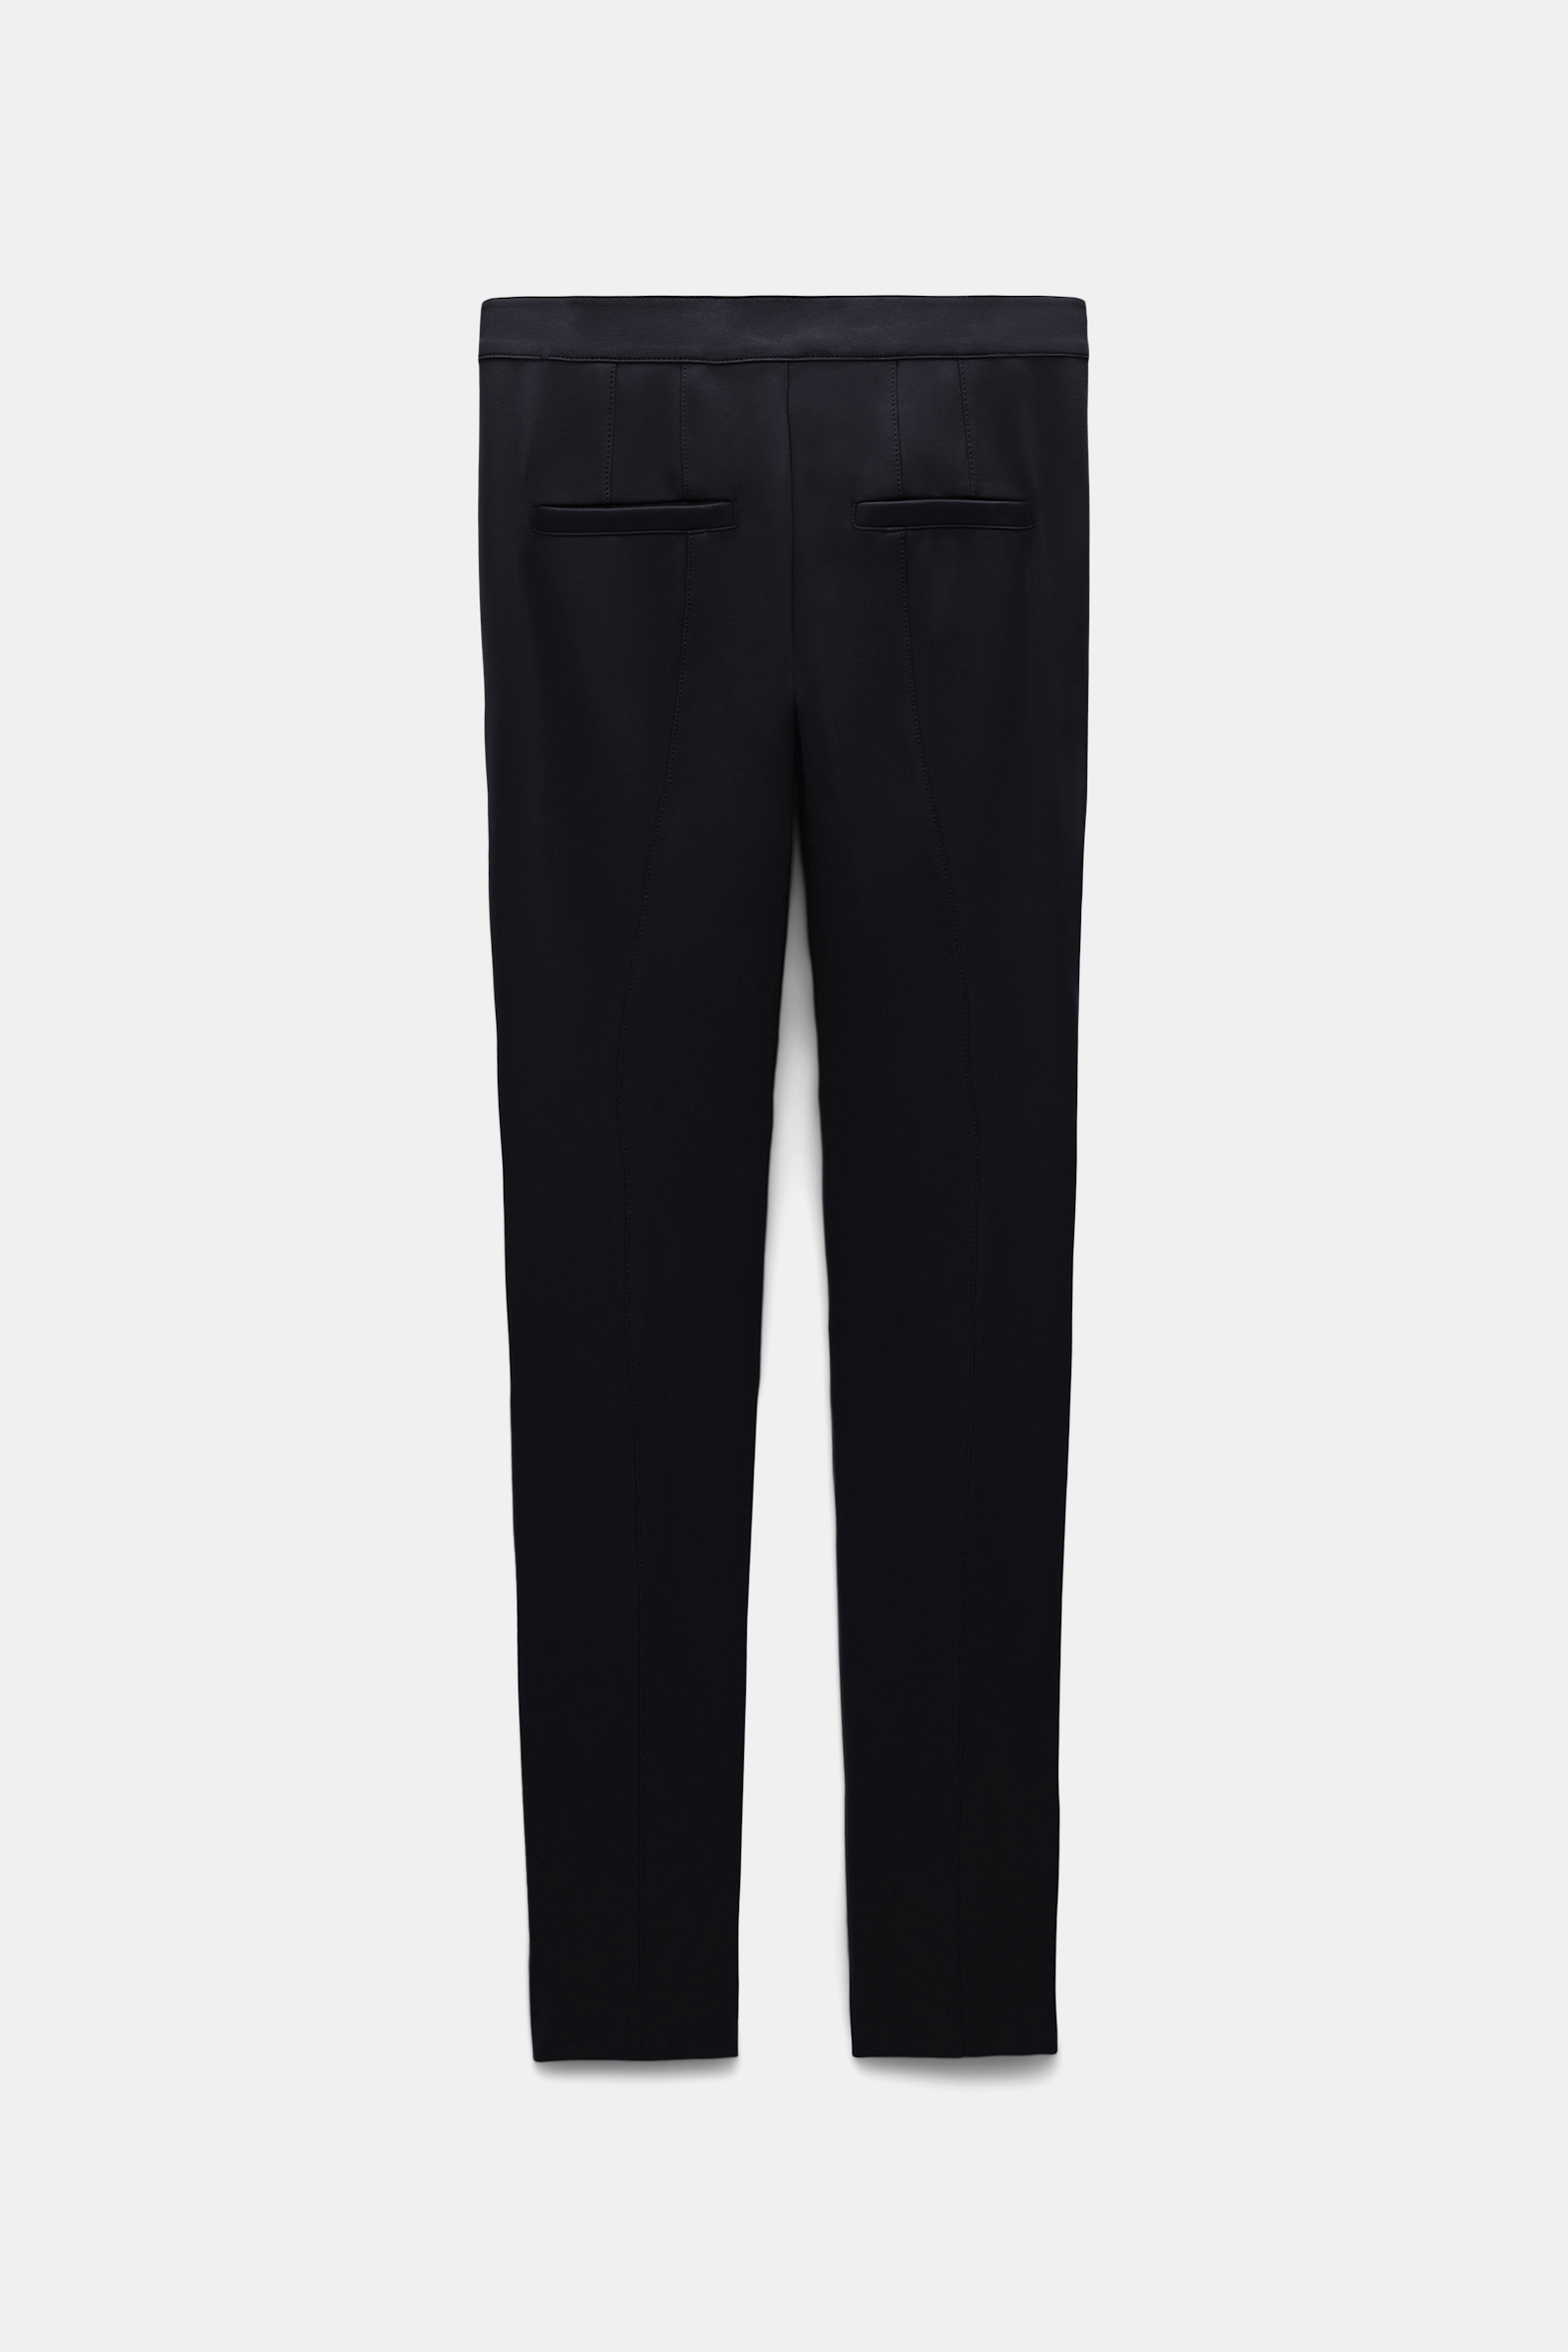 Dorothee Schumacher Slim fit pants in Punto Milano with pintucks pure black